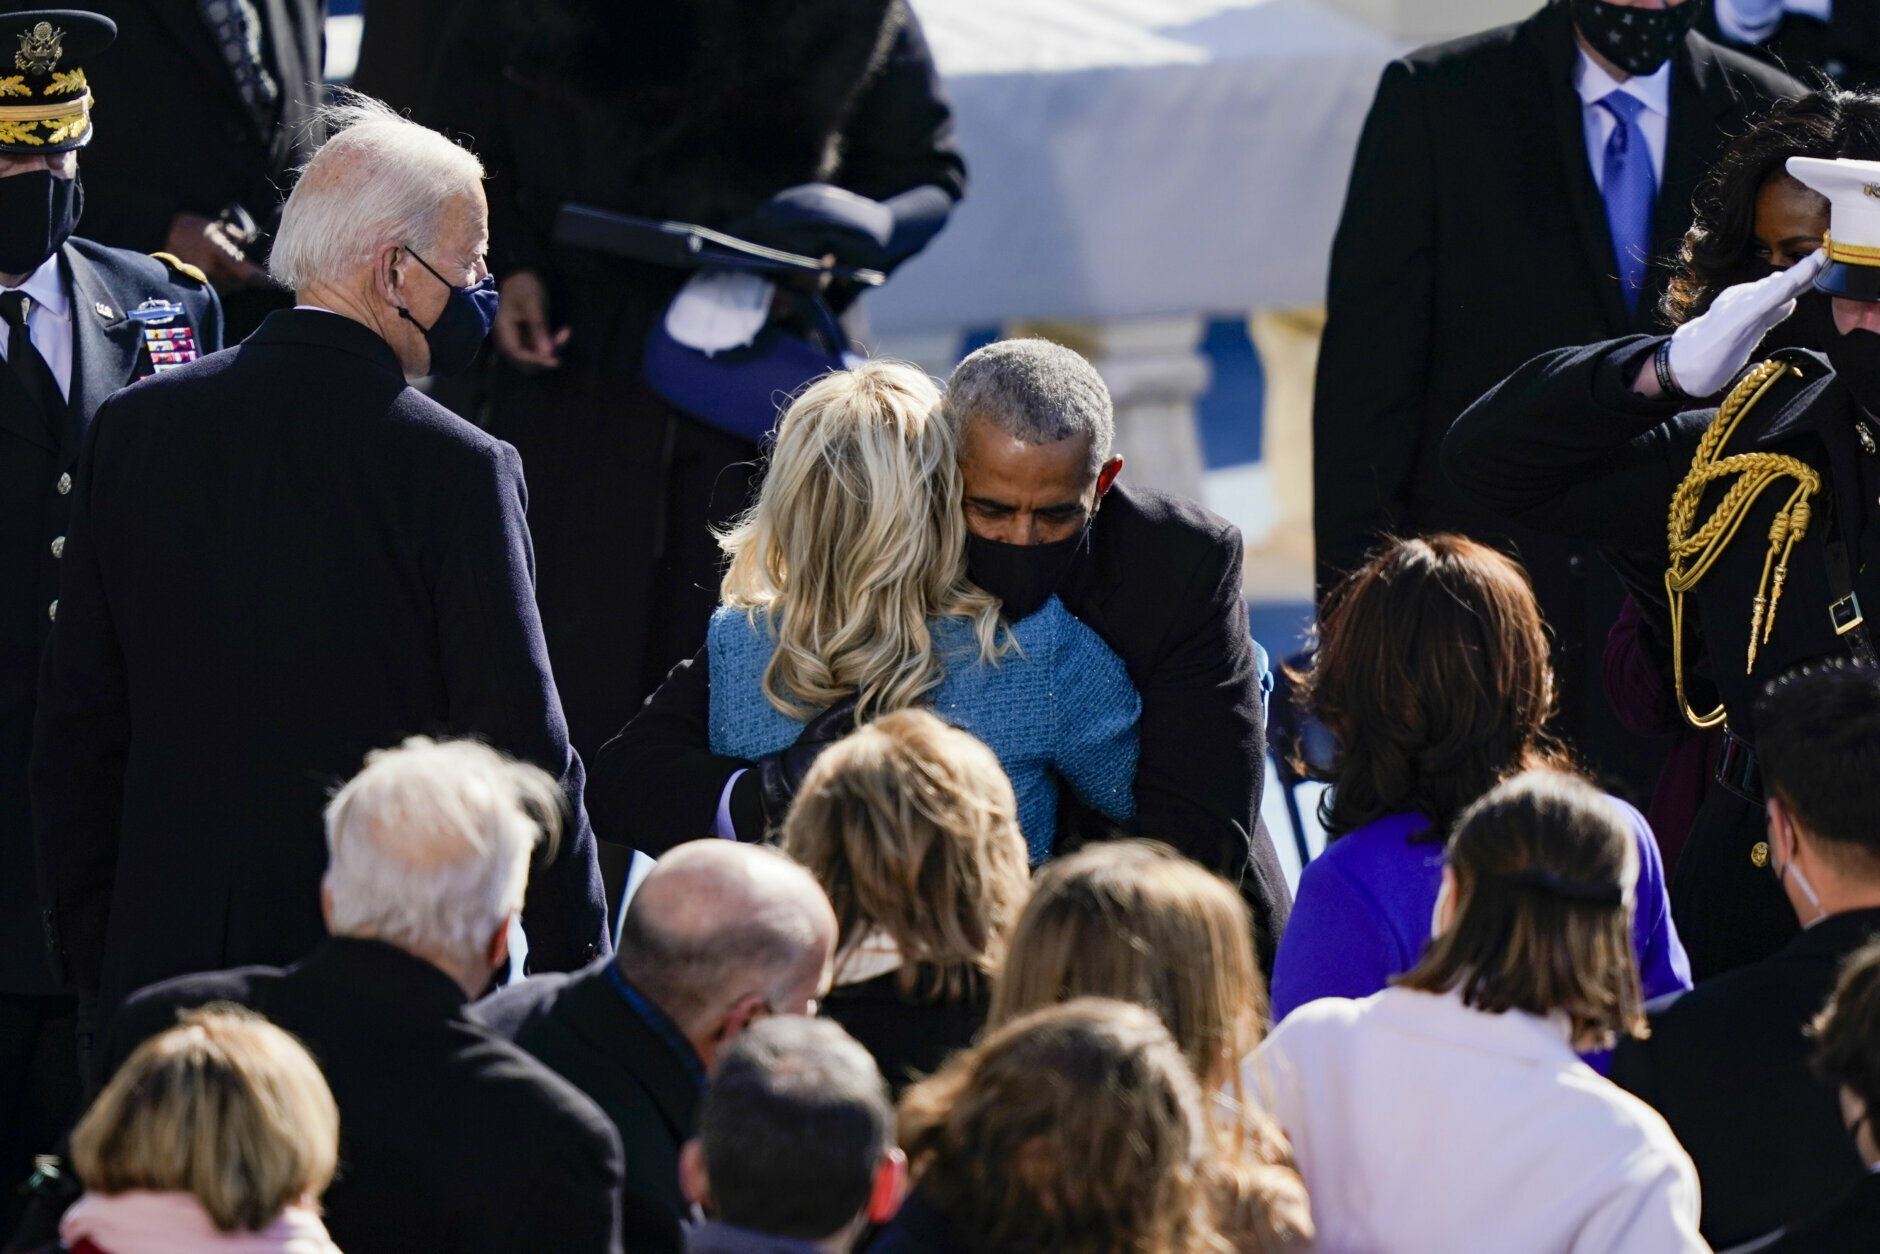 WASHINGTON, DC - JANUARY 20: Former president Barack Obama hugs First Lady Dr. Jill Biden during the inauguration of U.S. President Joe Biden on the West Front of the U.S. Capitol on January 20, 2021 in Washington, DC.  During today's inauguration ceremony Joe Biden becomes the 46th president of the United States. (Photo by Drew Angerer/Getty Images)